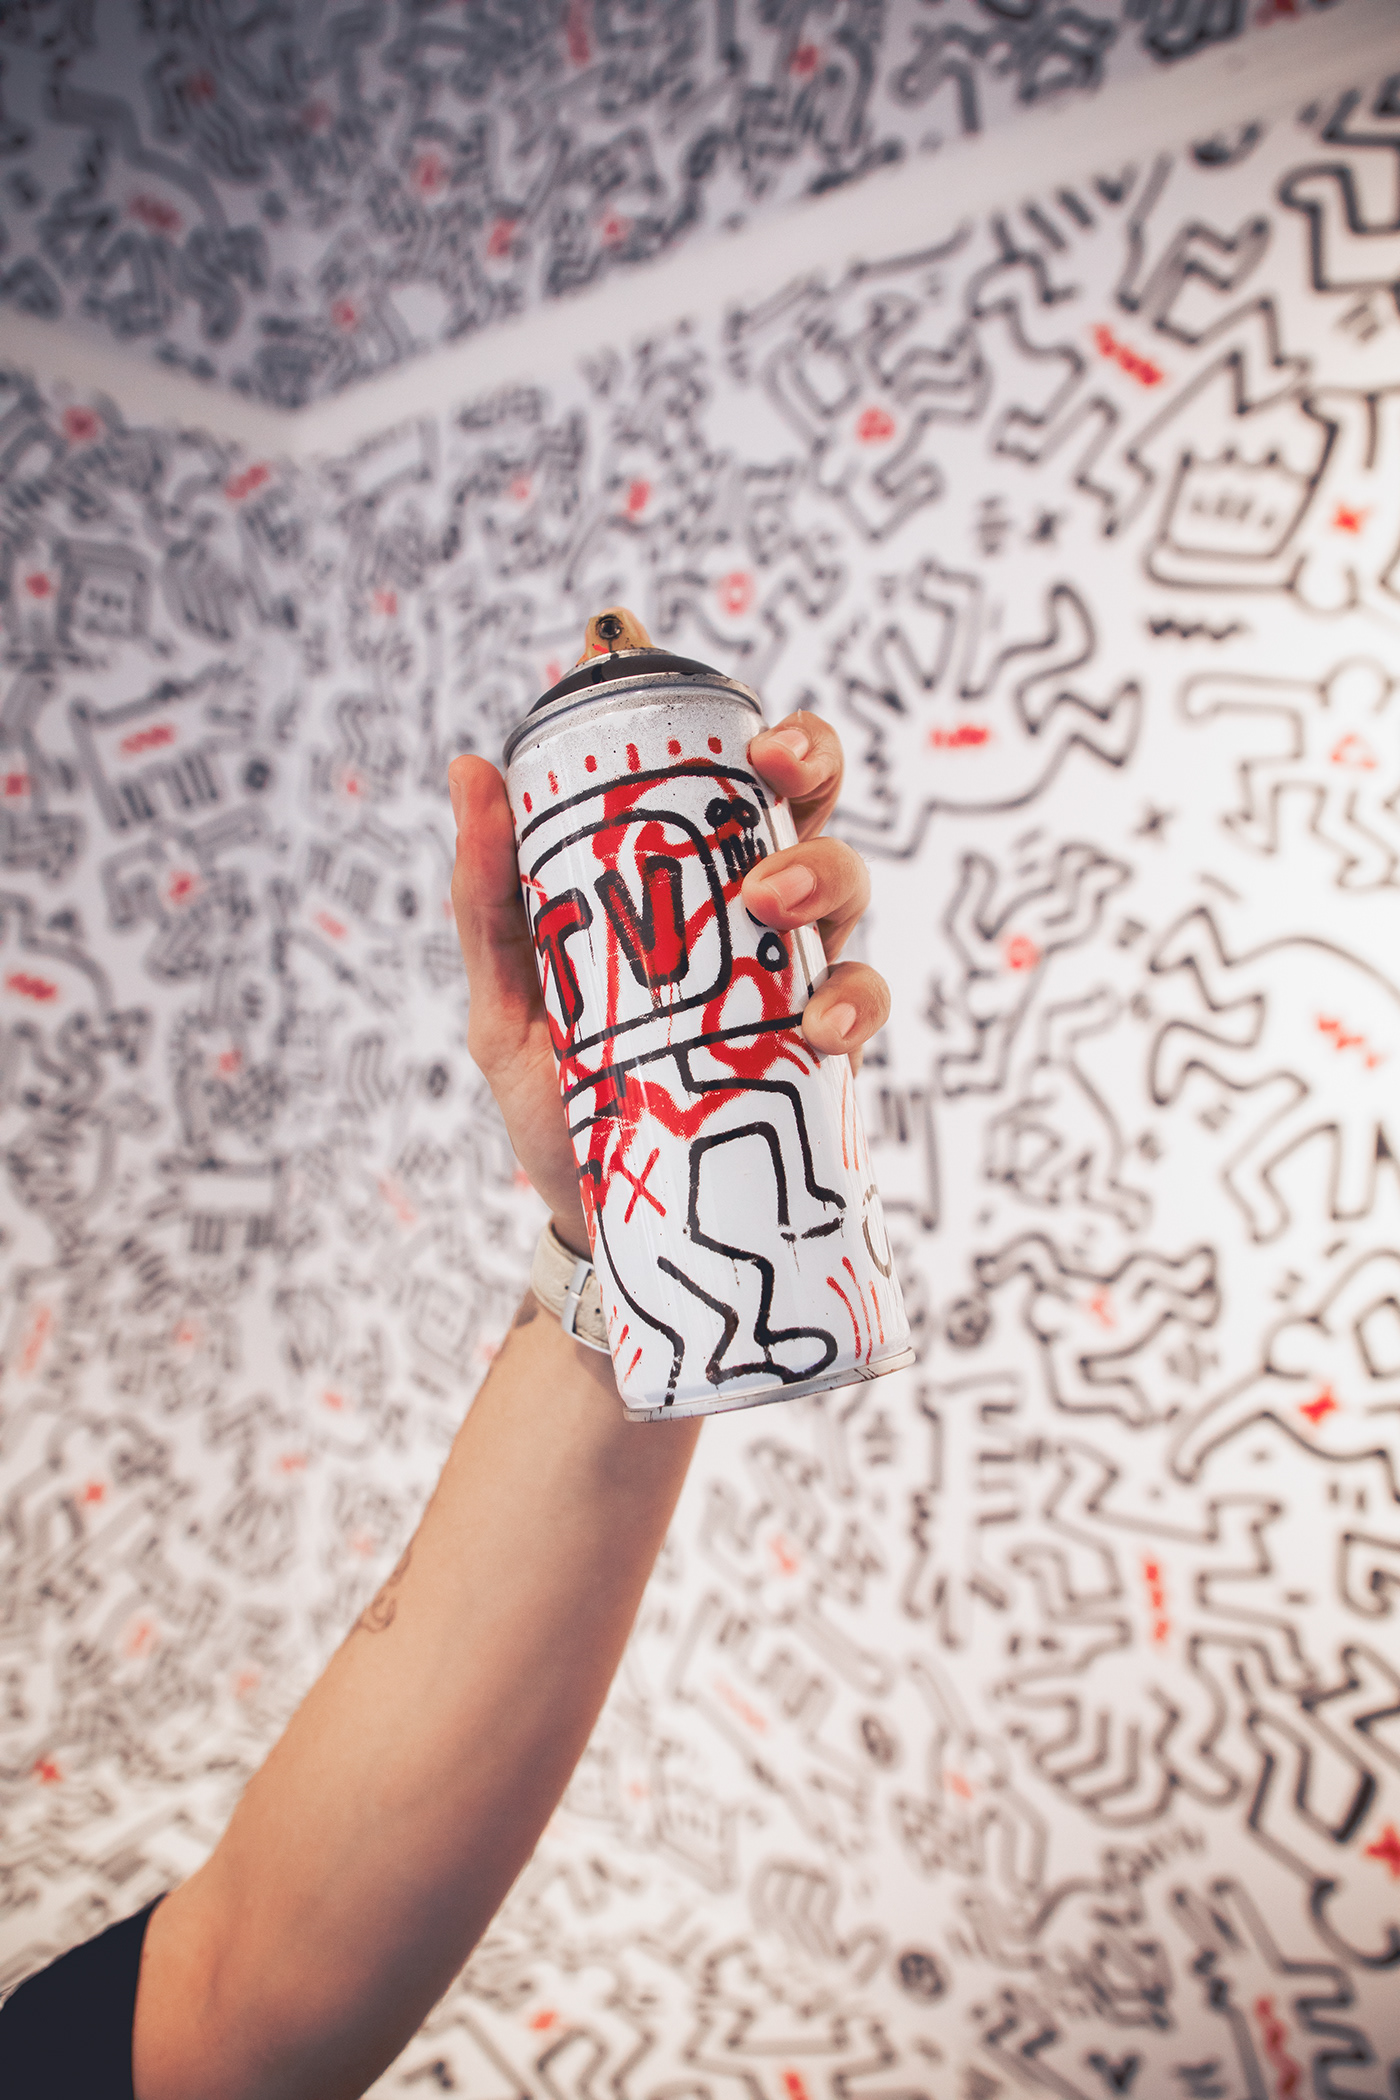 collab Collaboration converse ILLUSTRATION  INFLUENCER Keith Haring Keith Haring Foundation Keith haring x Converse popart Street Art 